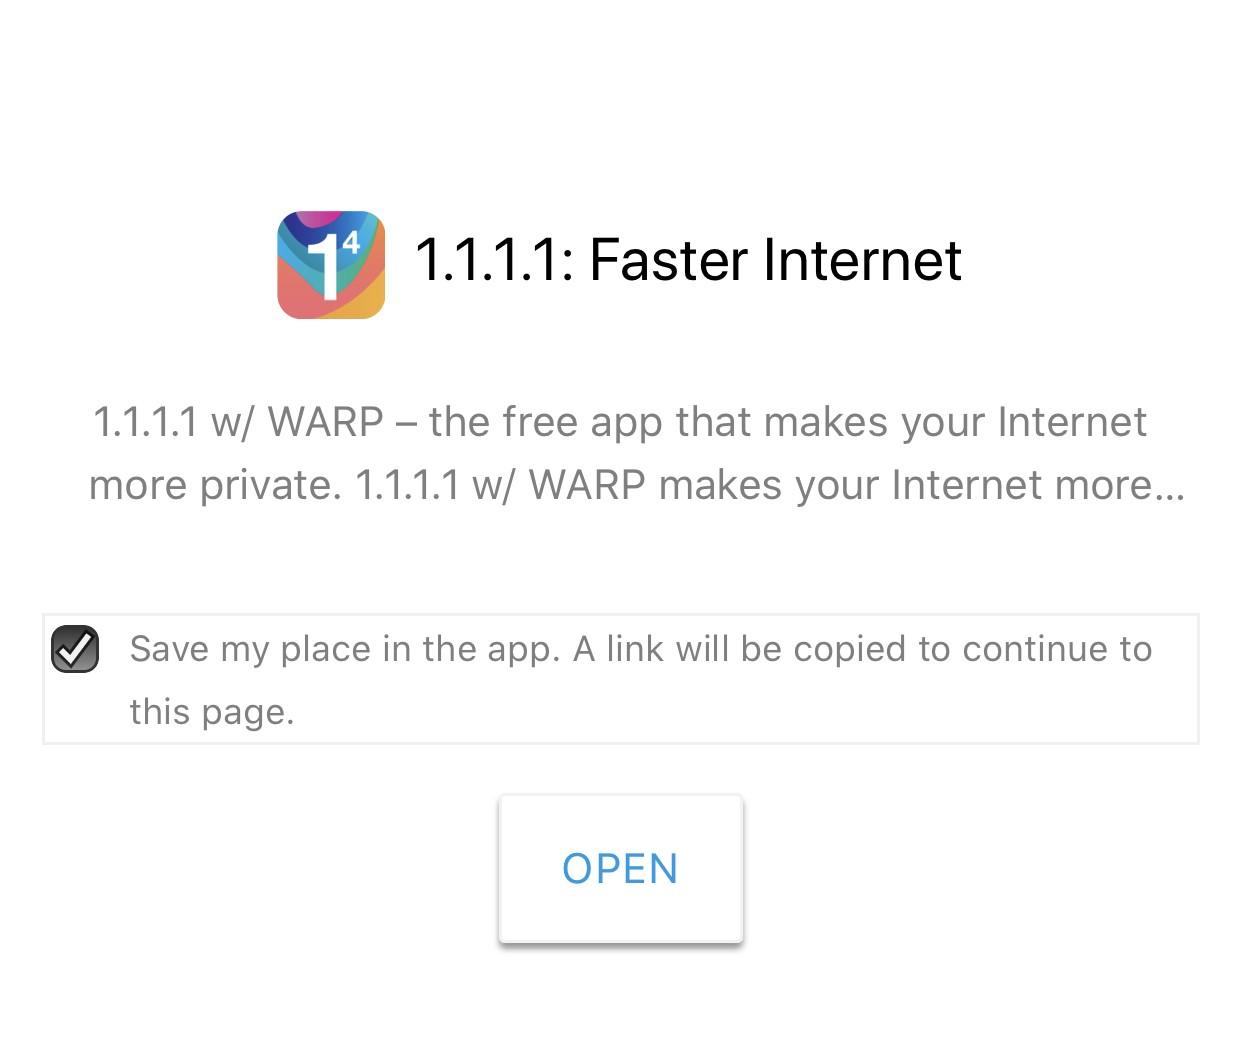 Access the download link of 1.1.1.1 app